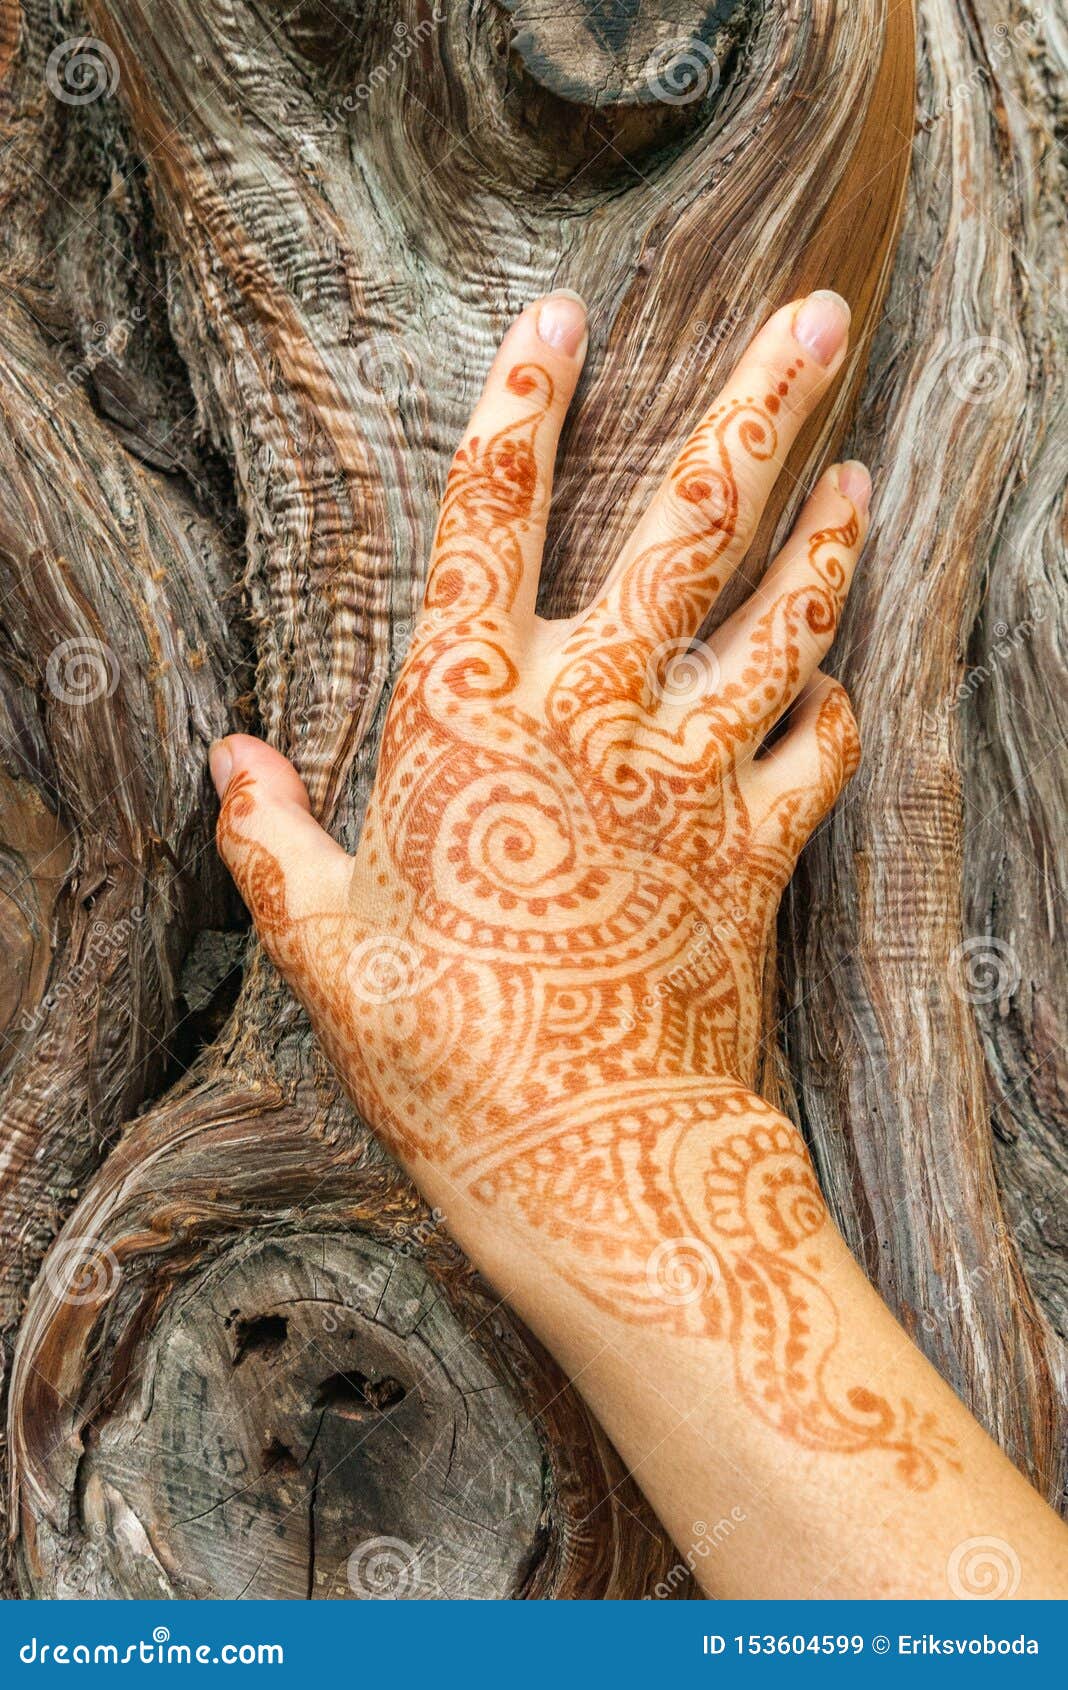 Discover 96+ about tree hand tattoo super cool .vn